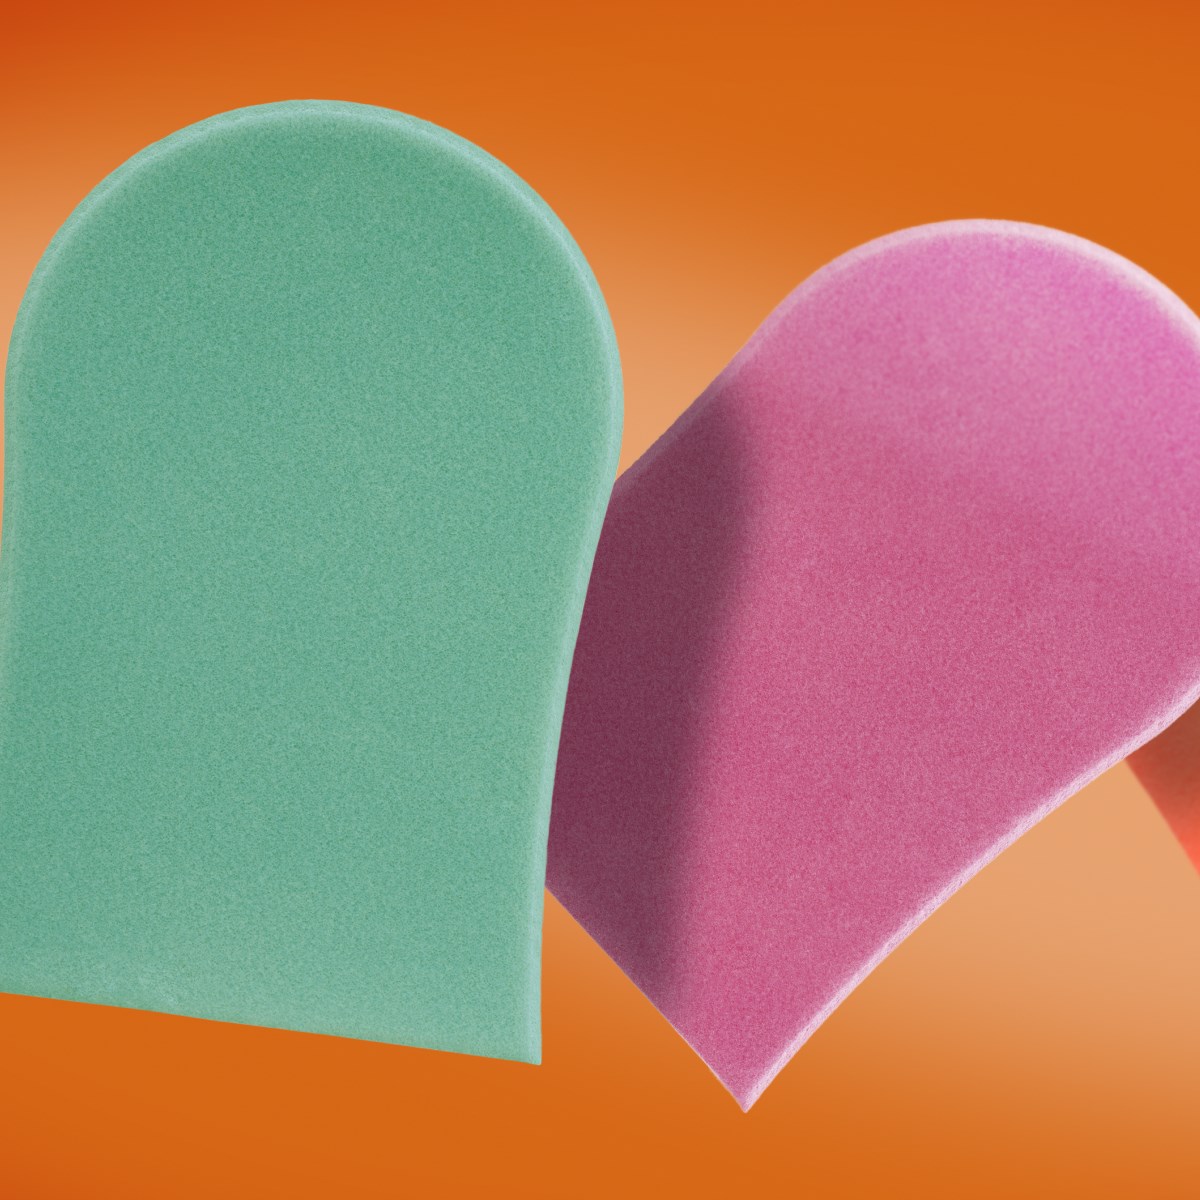 image: two tanning mitts on an orange background, one teal, one pink